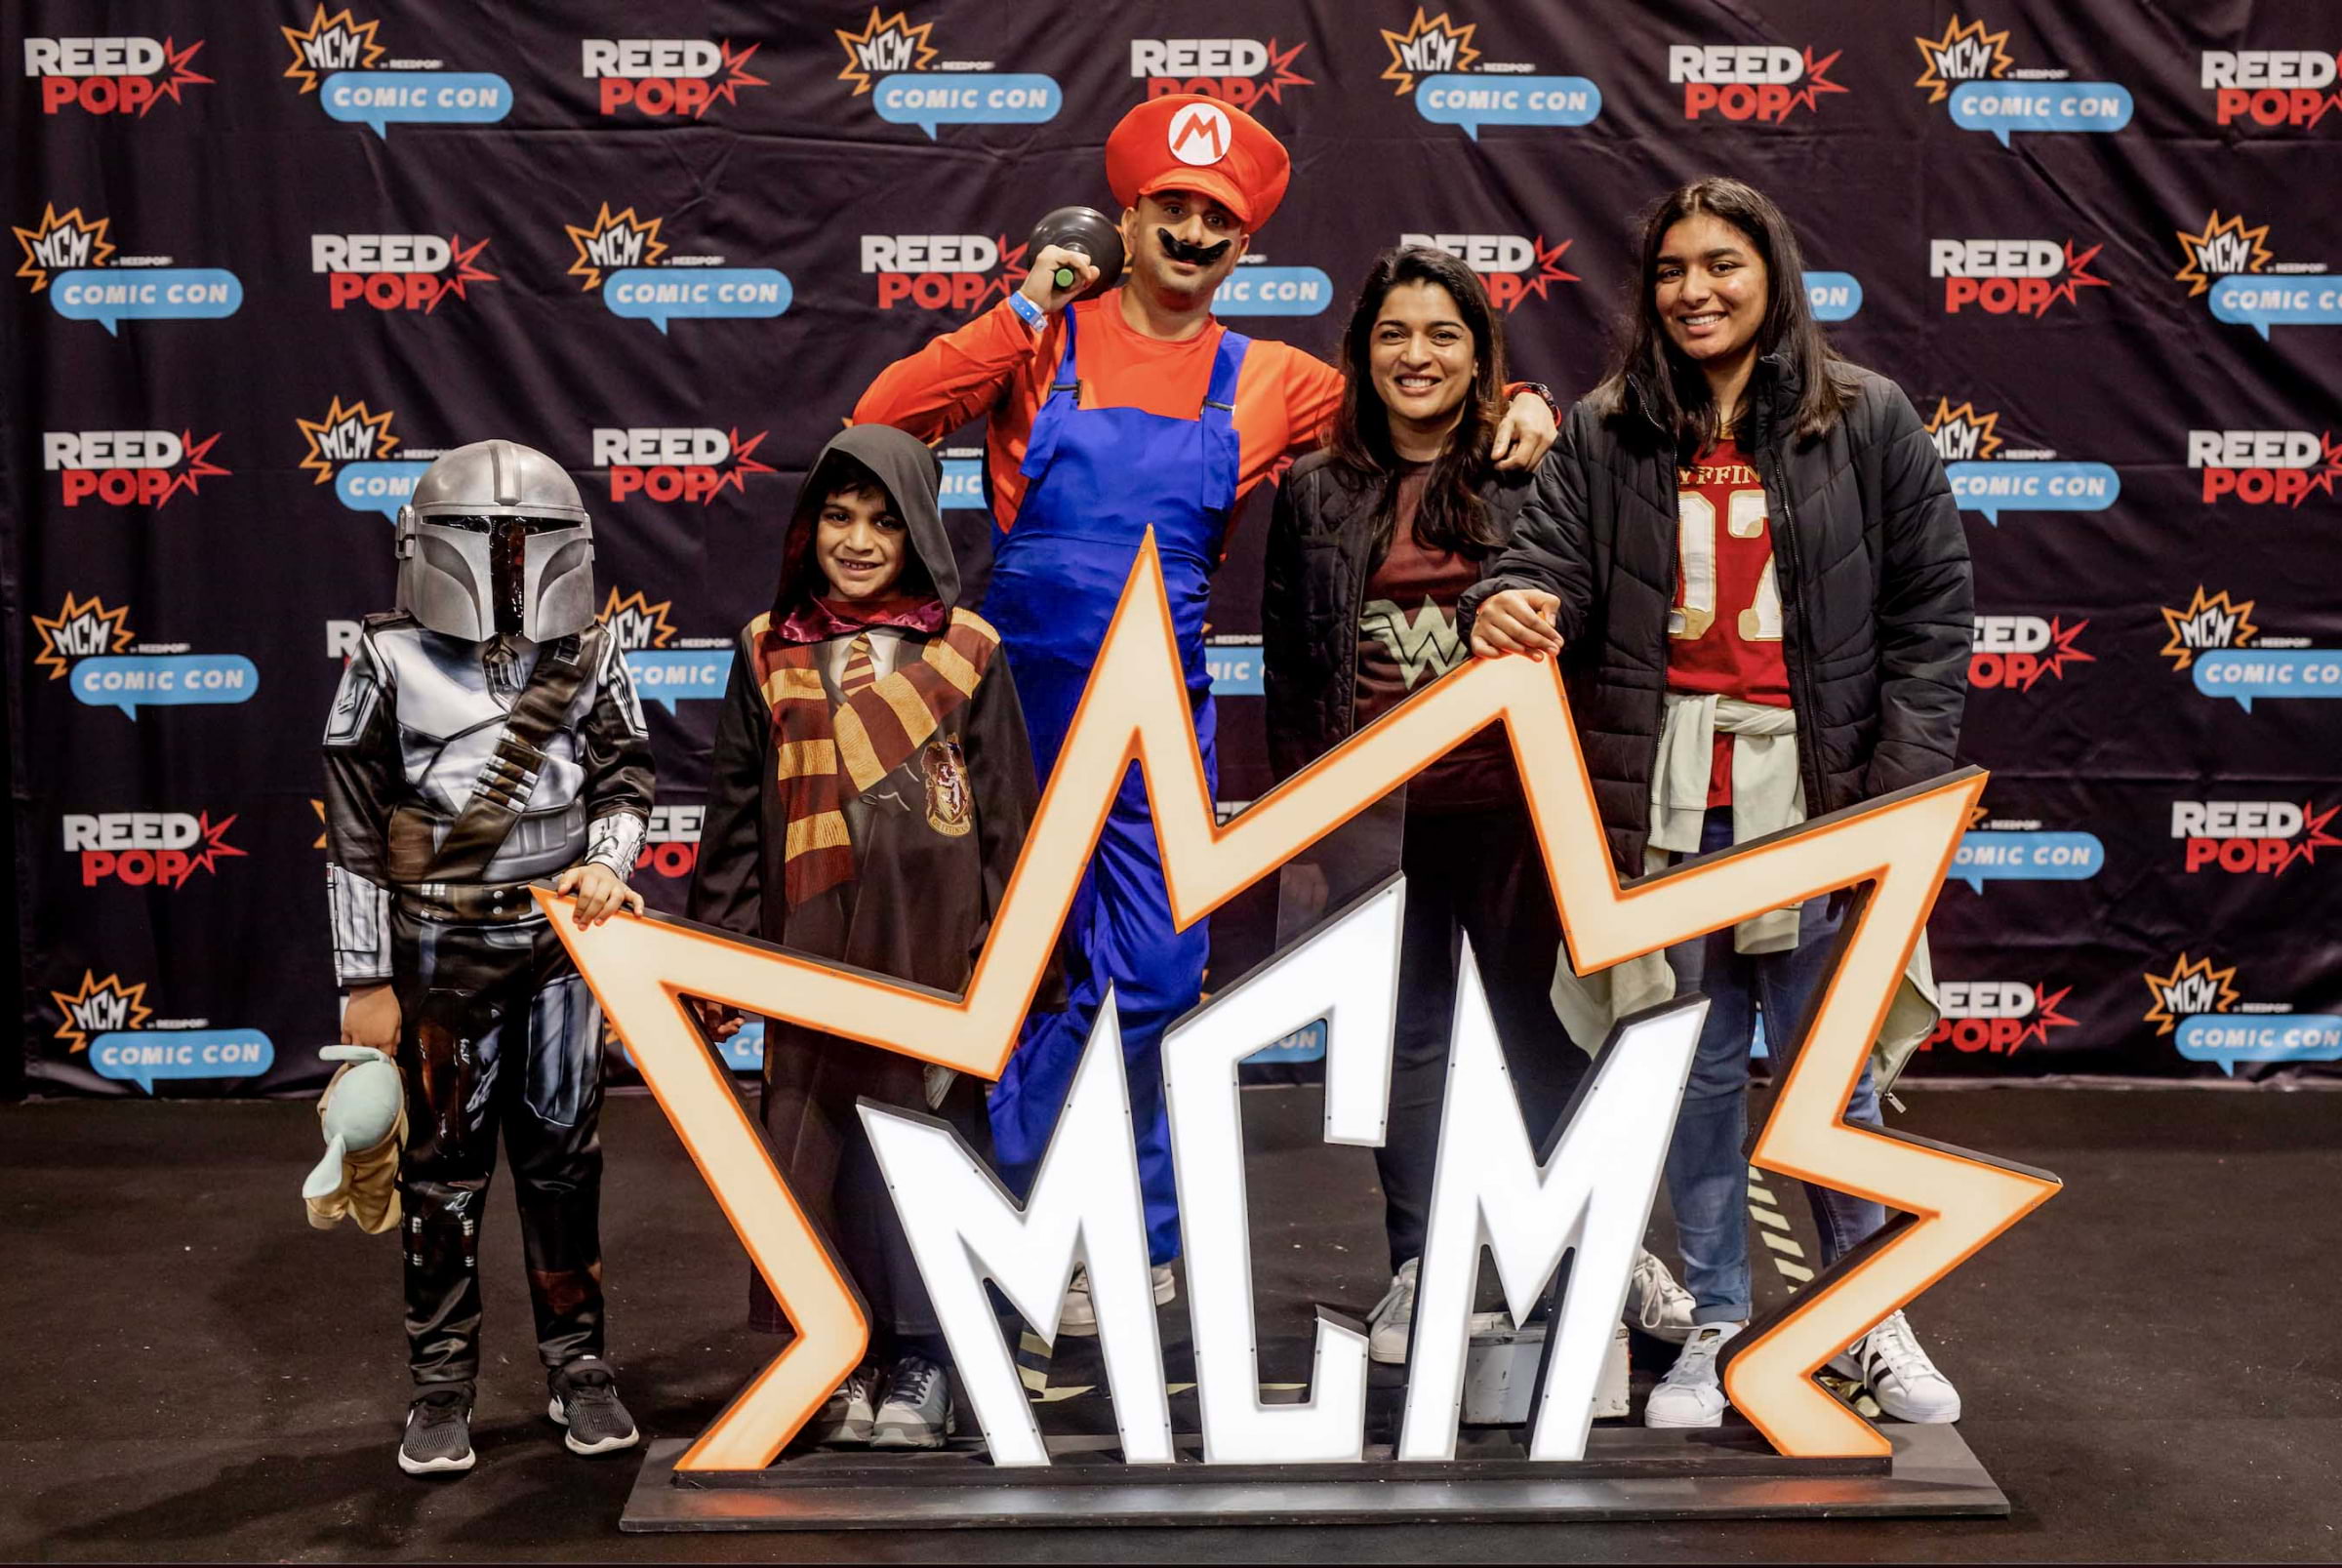 MCM Comic Con is coming to London this October